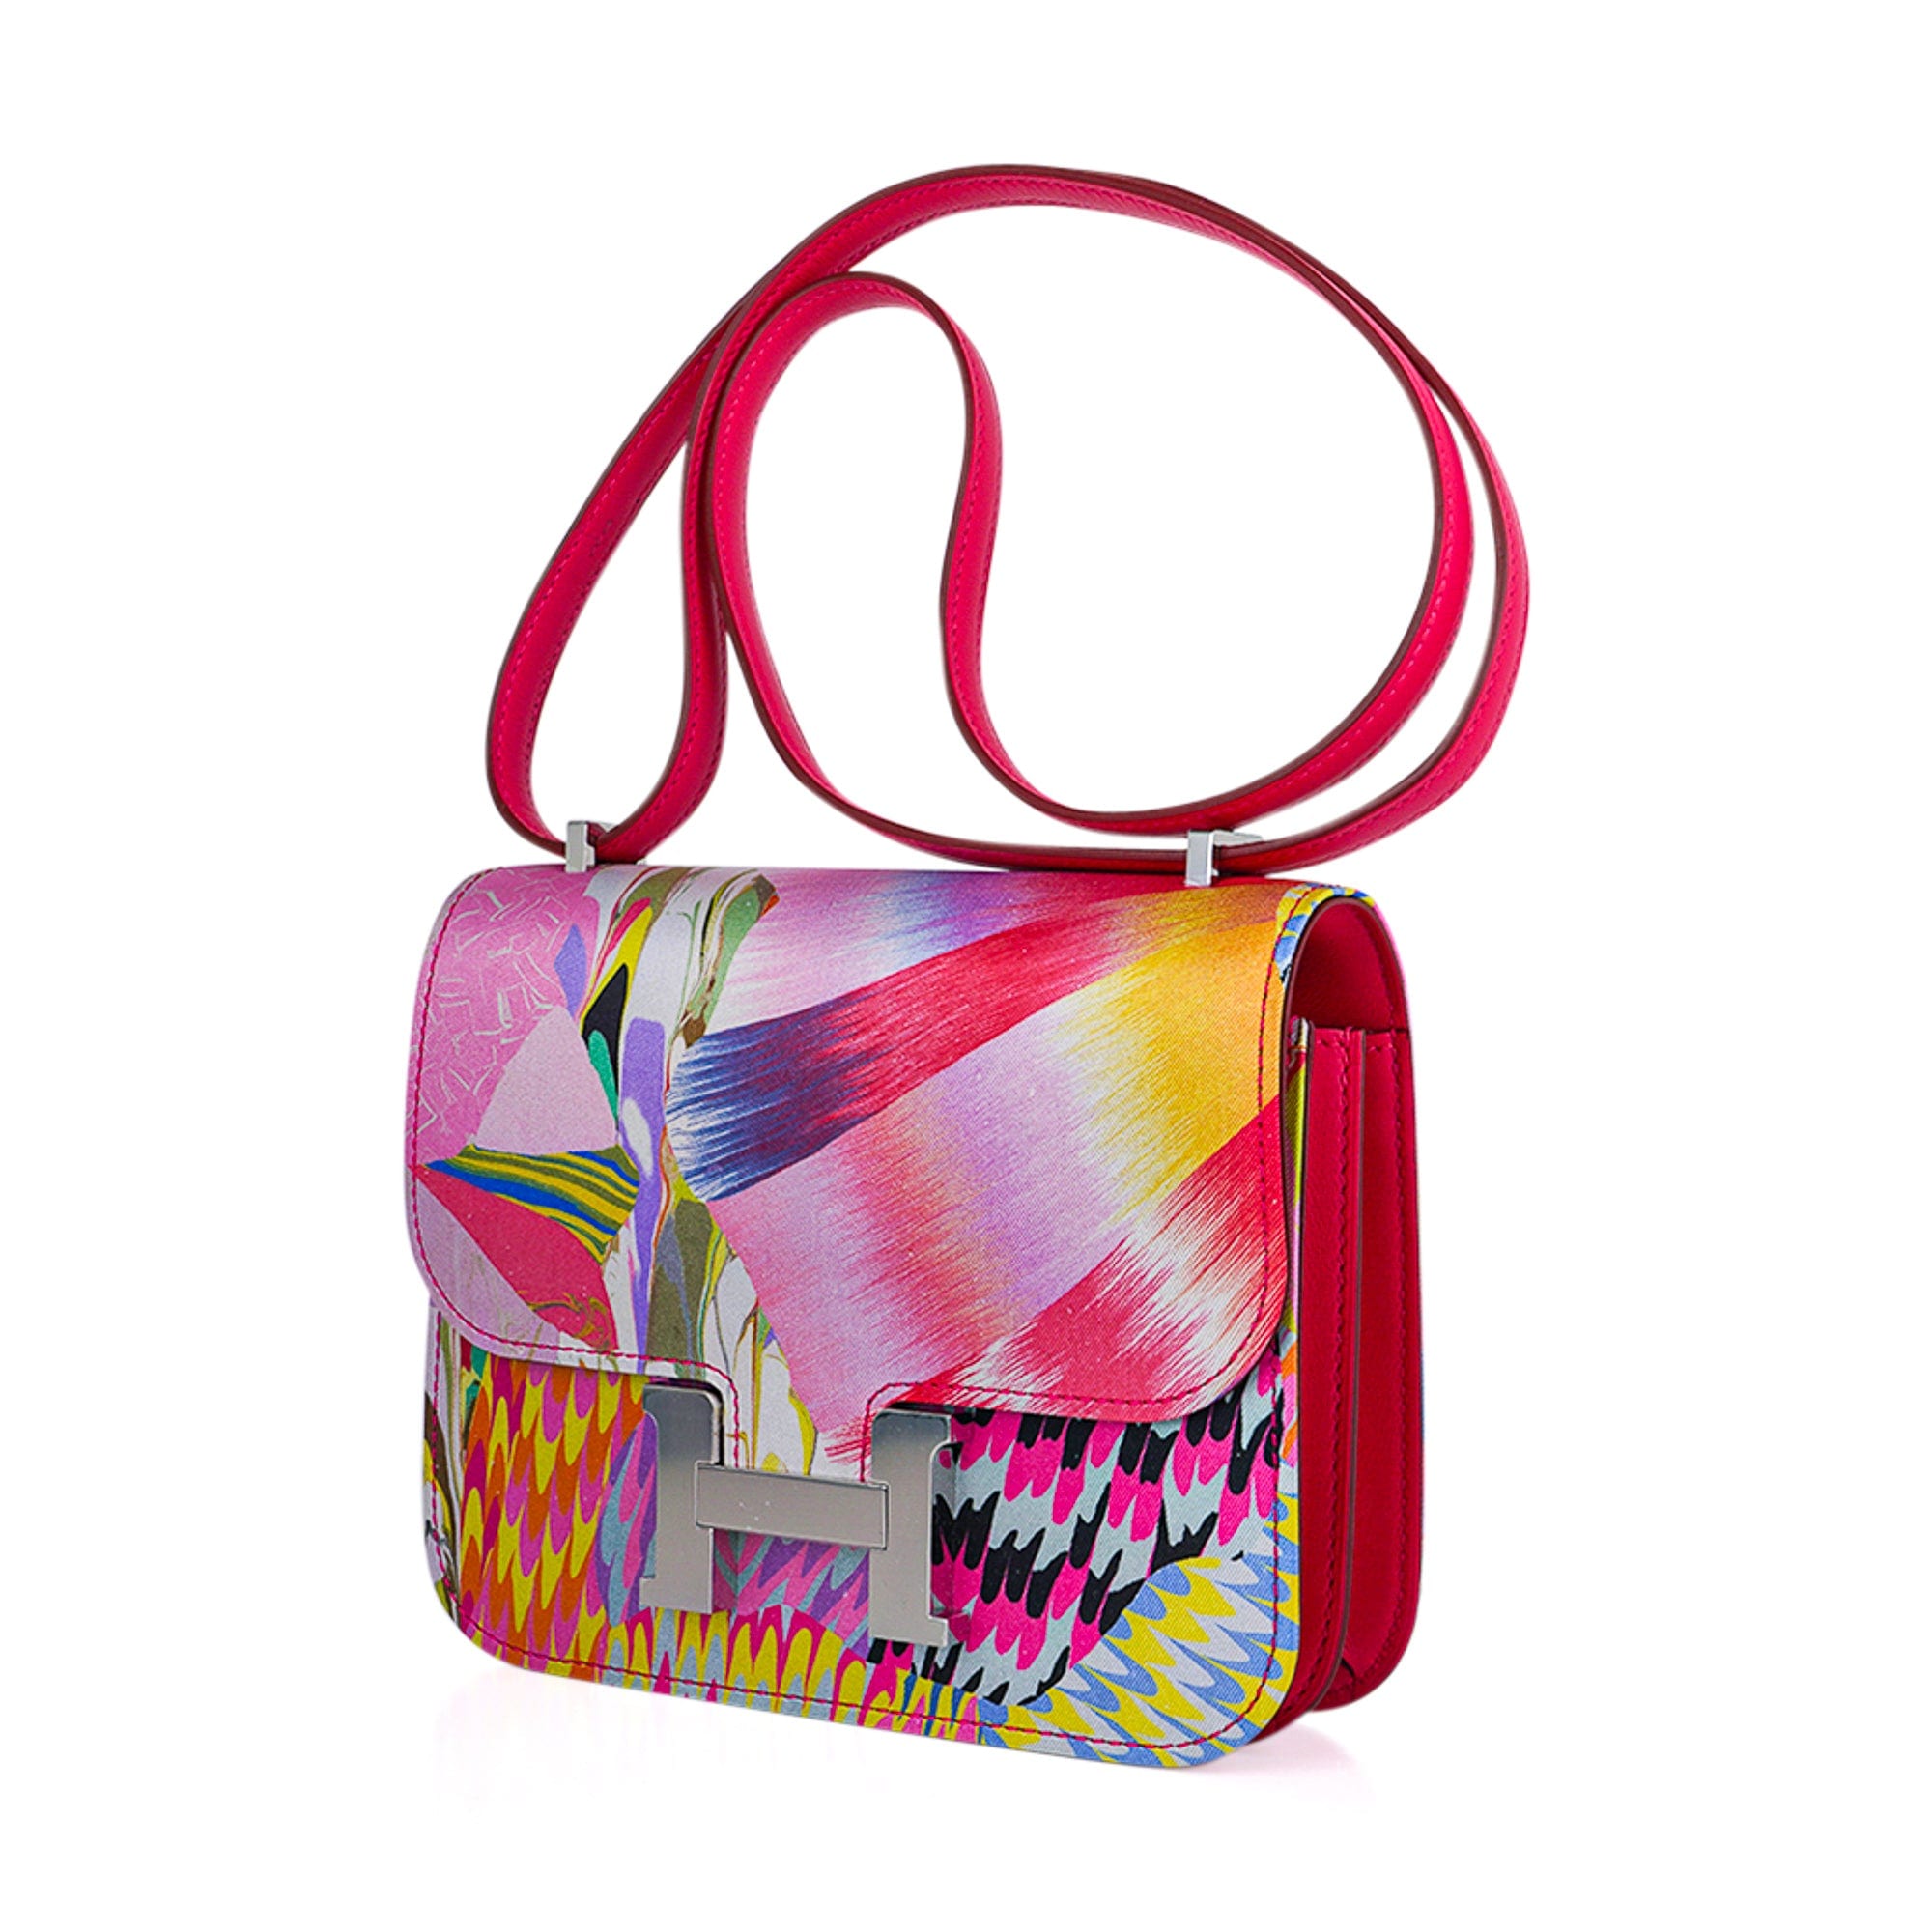 Hermes Constance 18, Multicolor Marble with Palladium Hardware